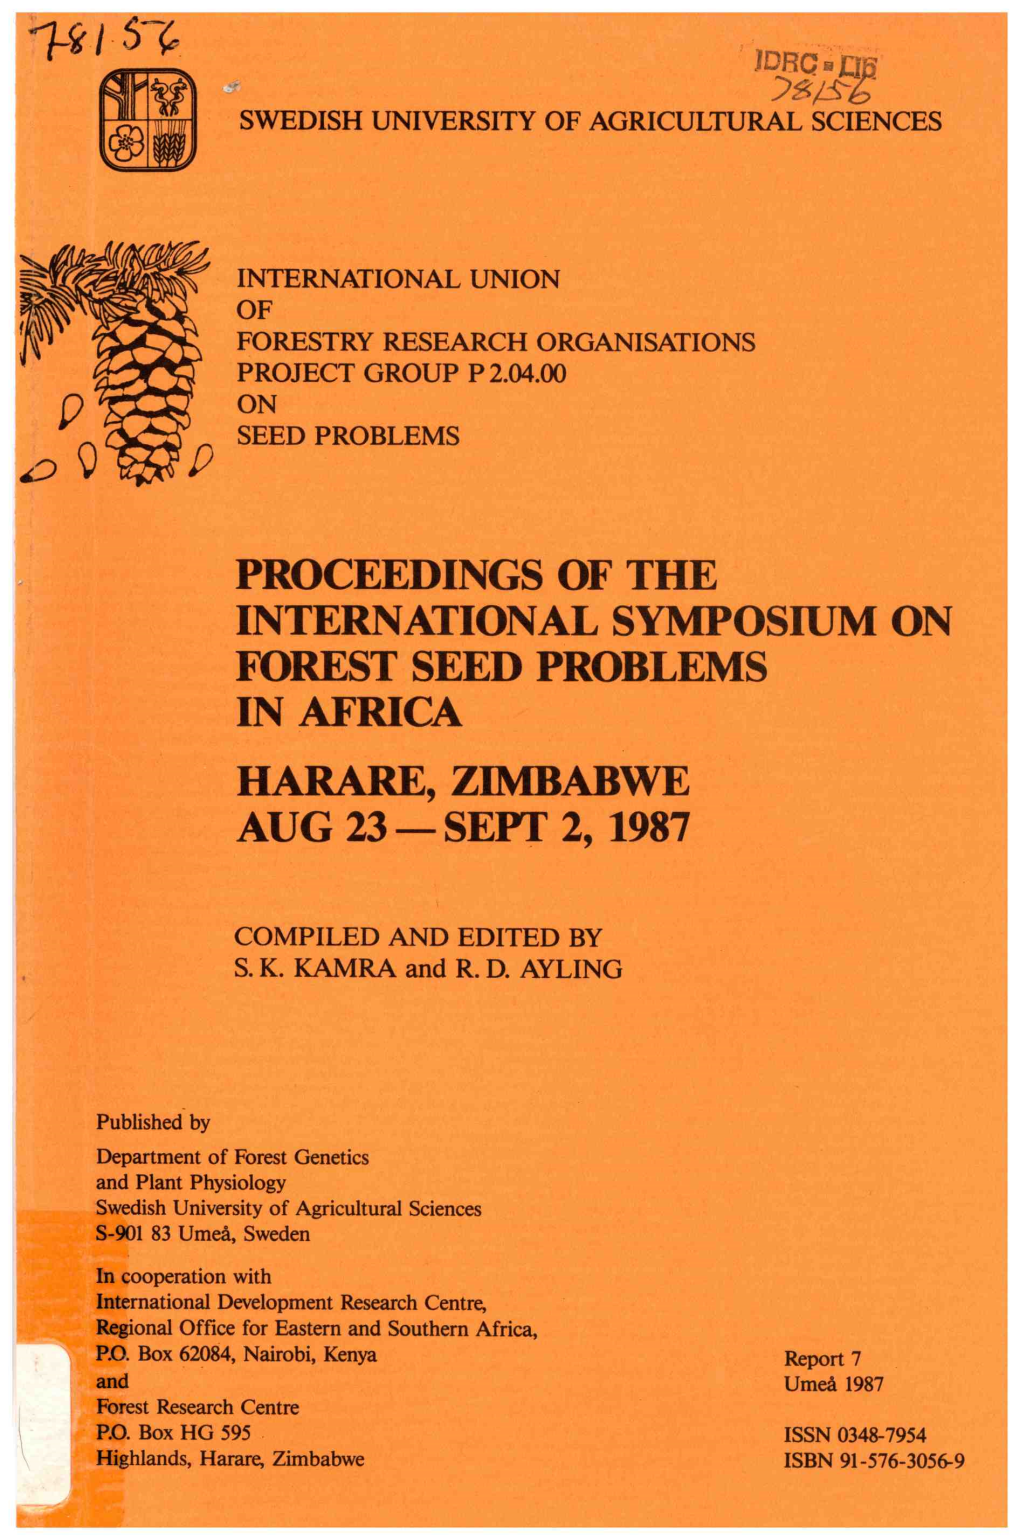 Proceedings of the International Symposium on Forest Seed Problems in Africa Harare, Zimbabwe Aug 23 - Sept 2, 1987